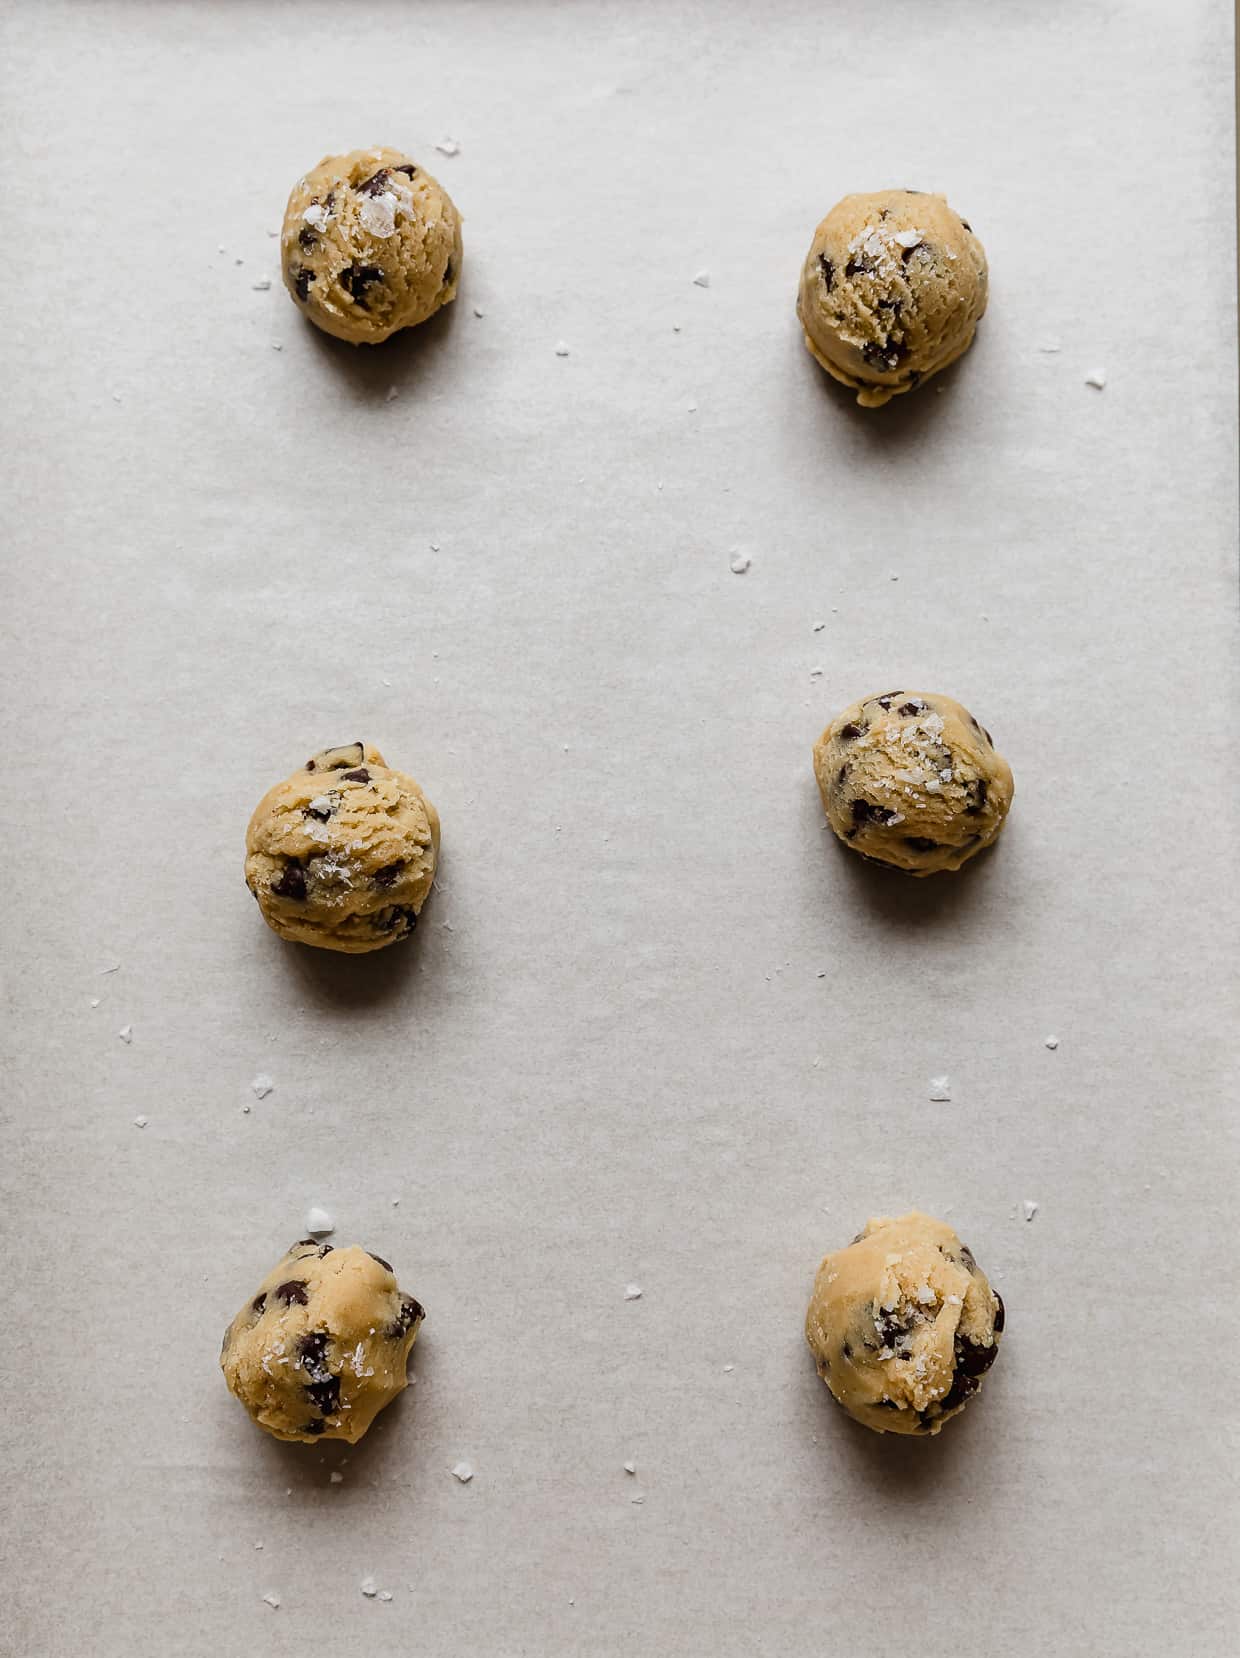 Six chocolate chip cookie dough balls on a white parchment lined baking sheet.